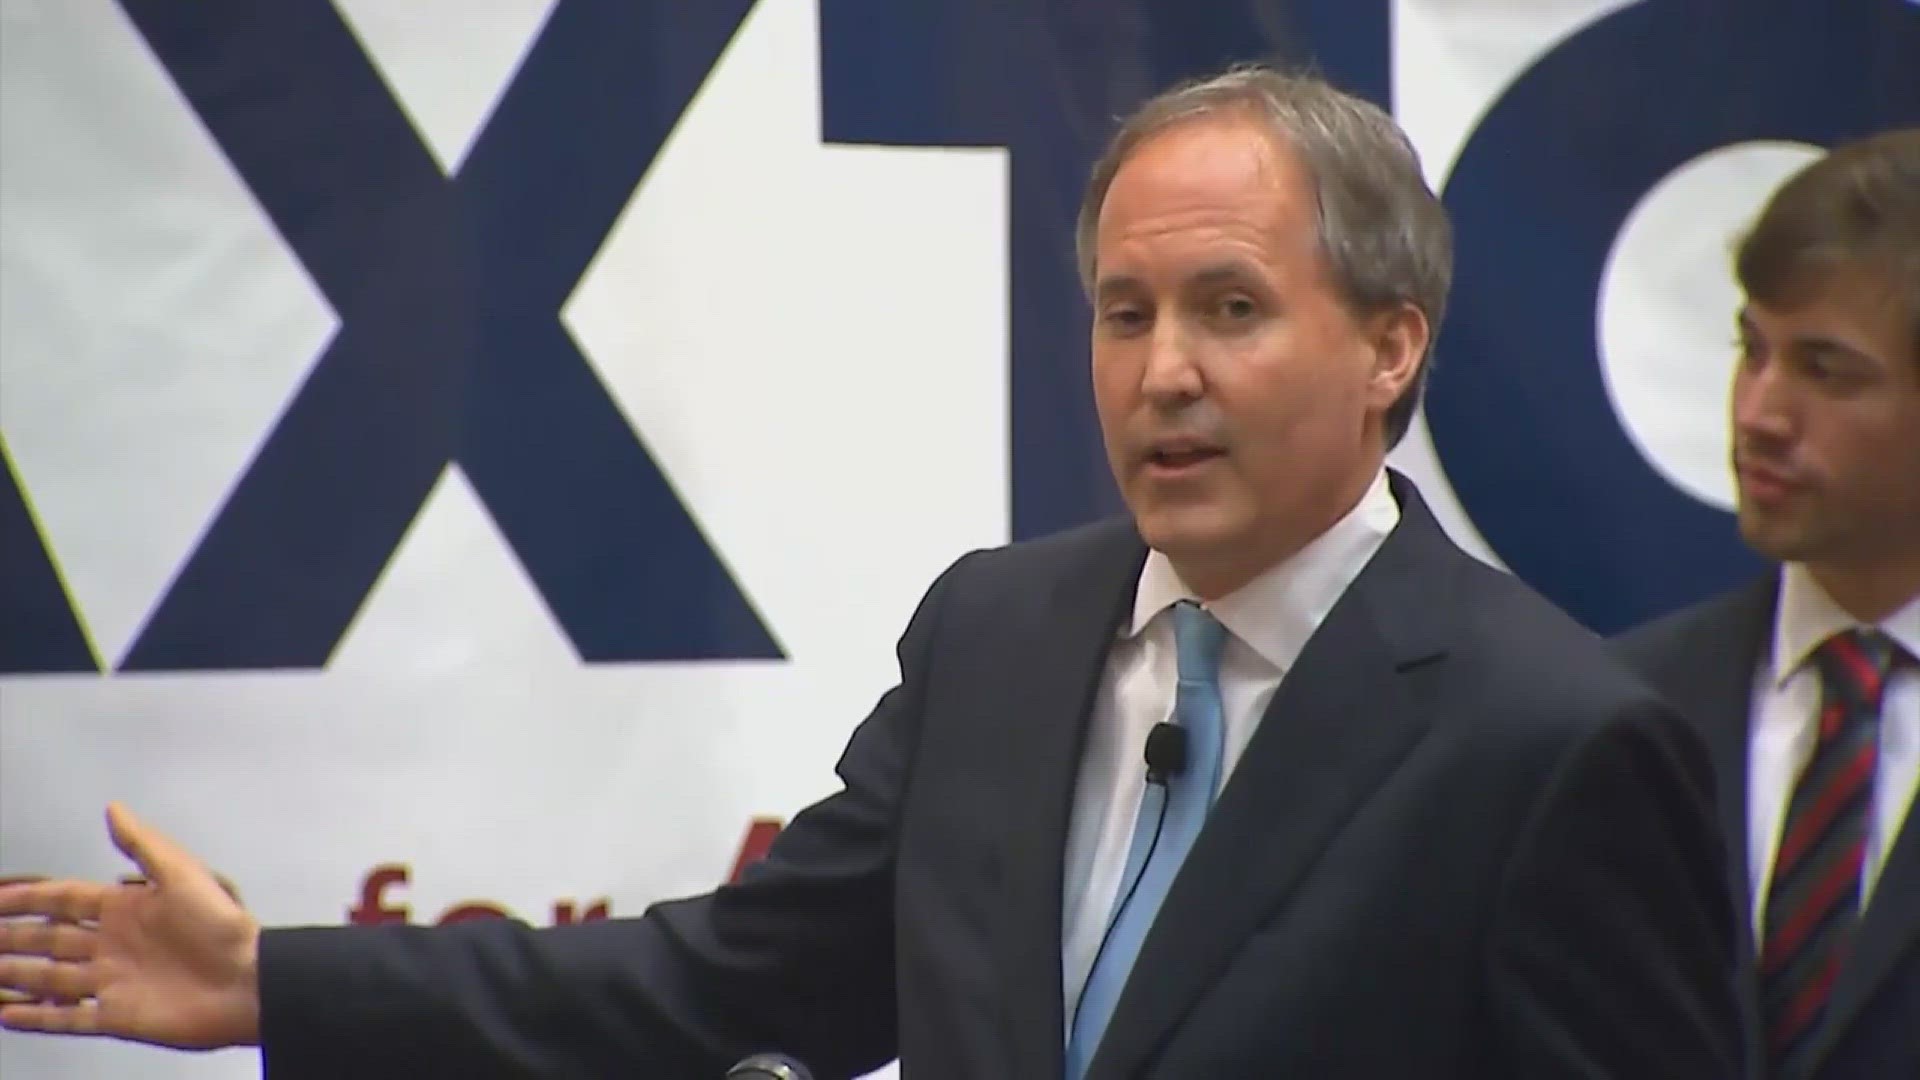 There are 19 Republicans and 12 Democrats in the Senate that will determine Paxton's fate.